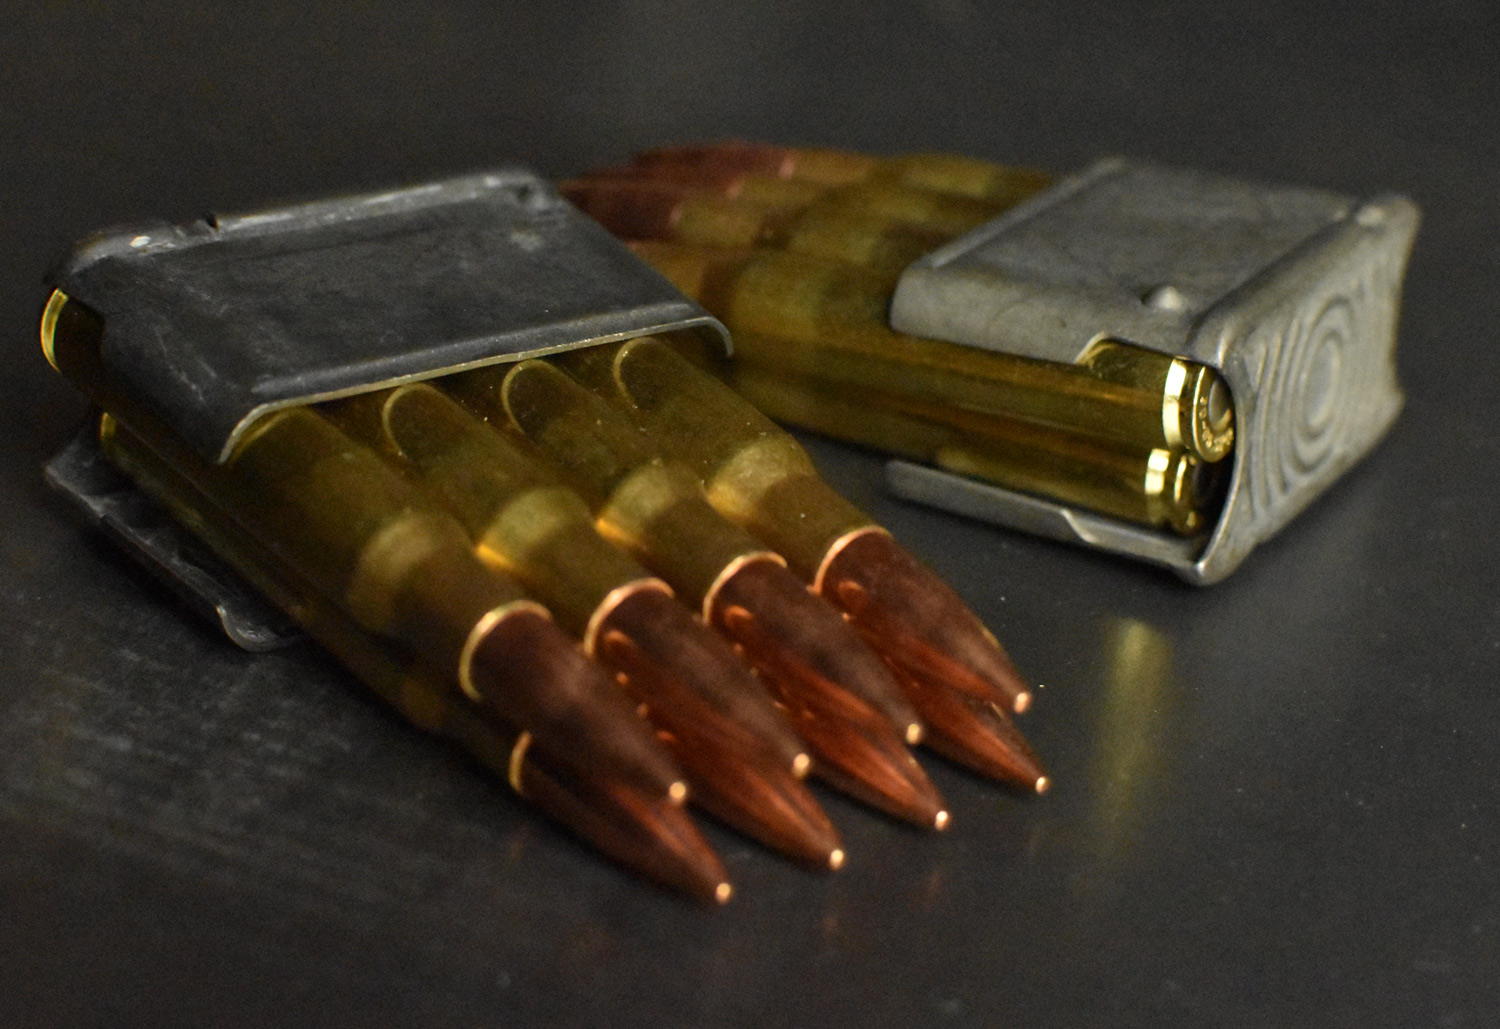 Two en bloc clips loaded with 30-06 ammo commonly used by an M1 Garand rifle